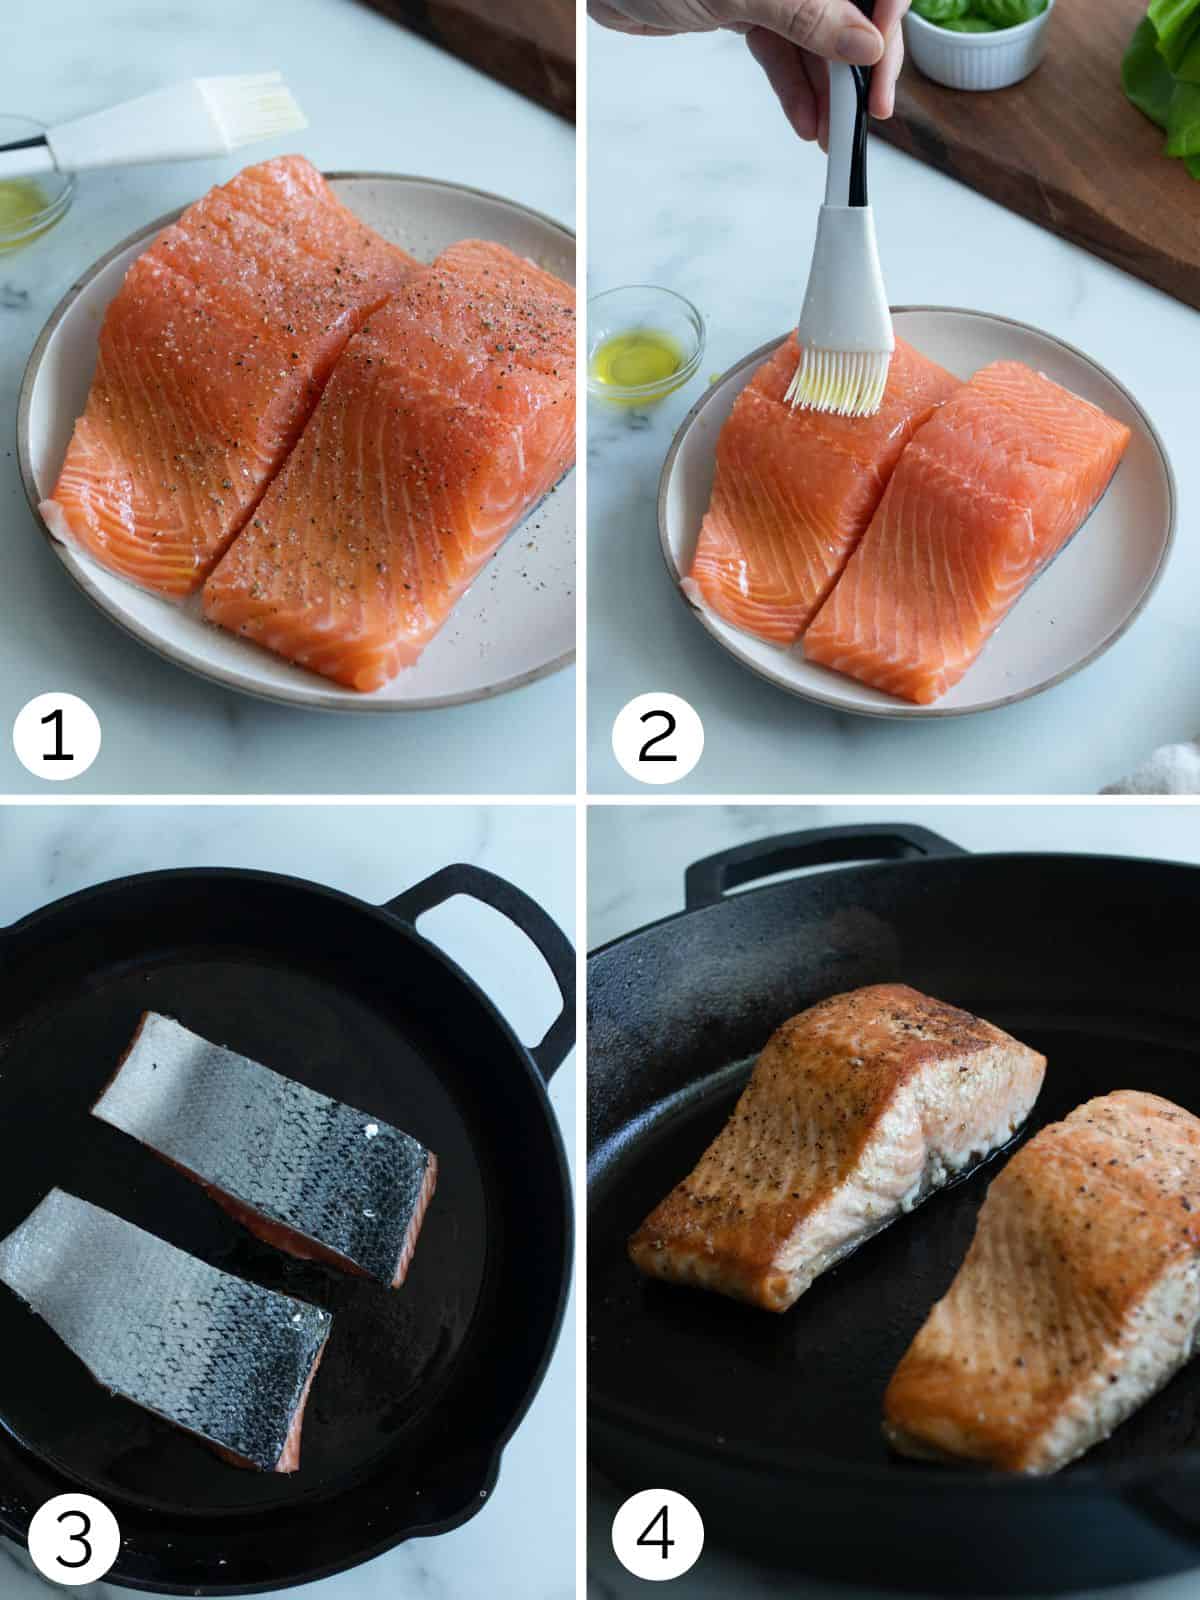 Step by step process showing how to sear salmon in a cast iron pan.